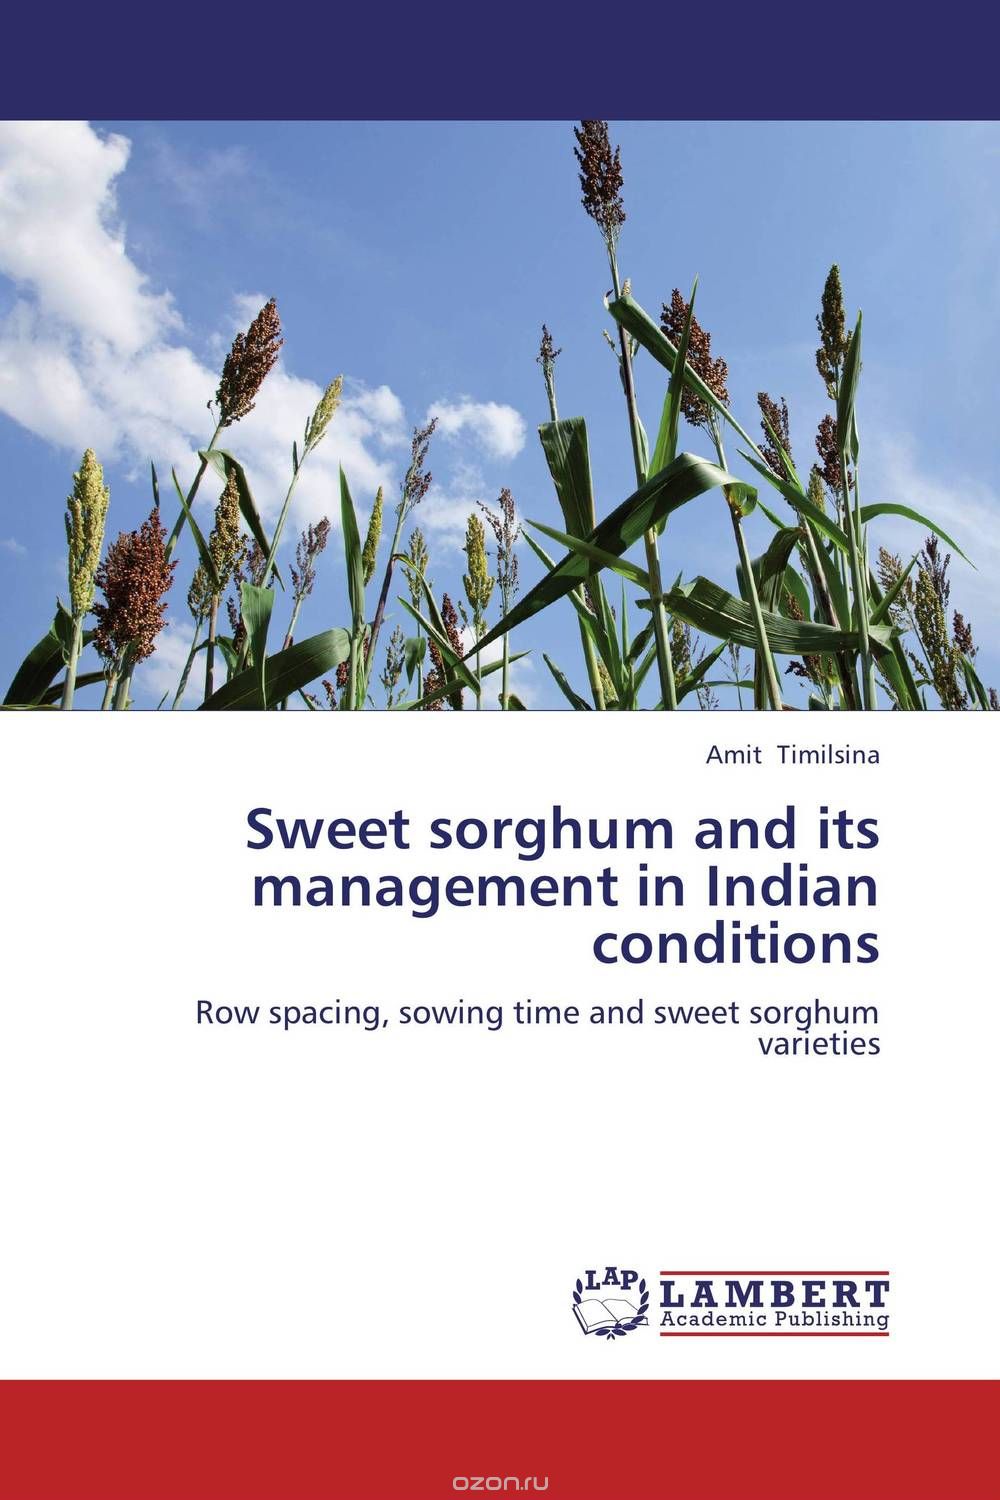 Скачать книгу "Sweet sorghum and its management in Indian conditions"